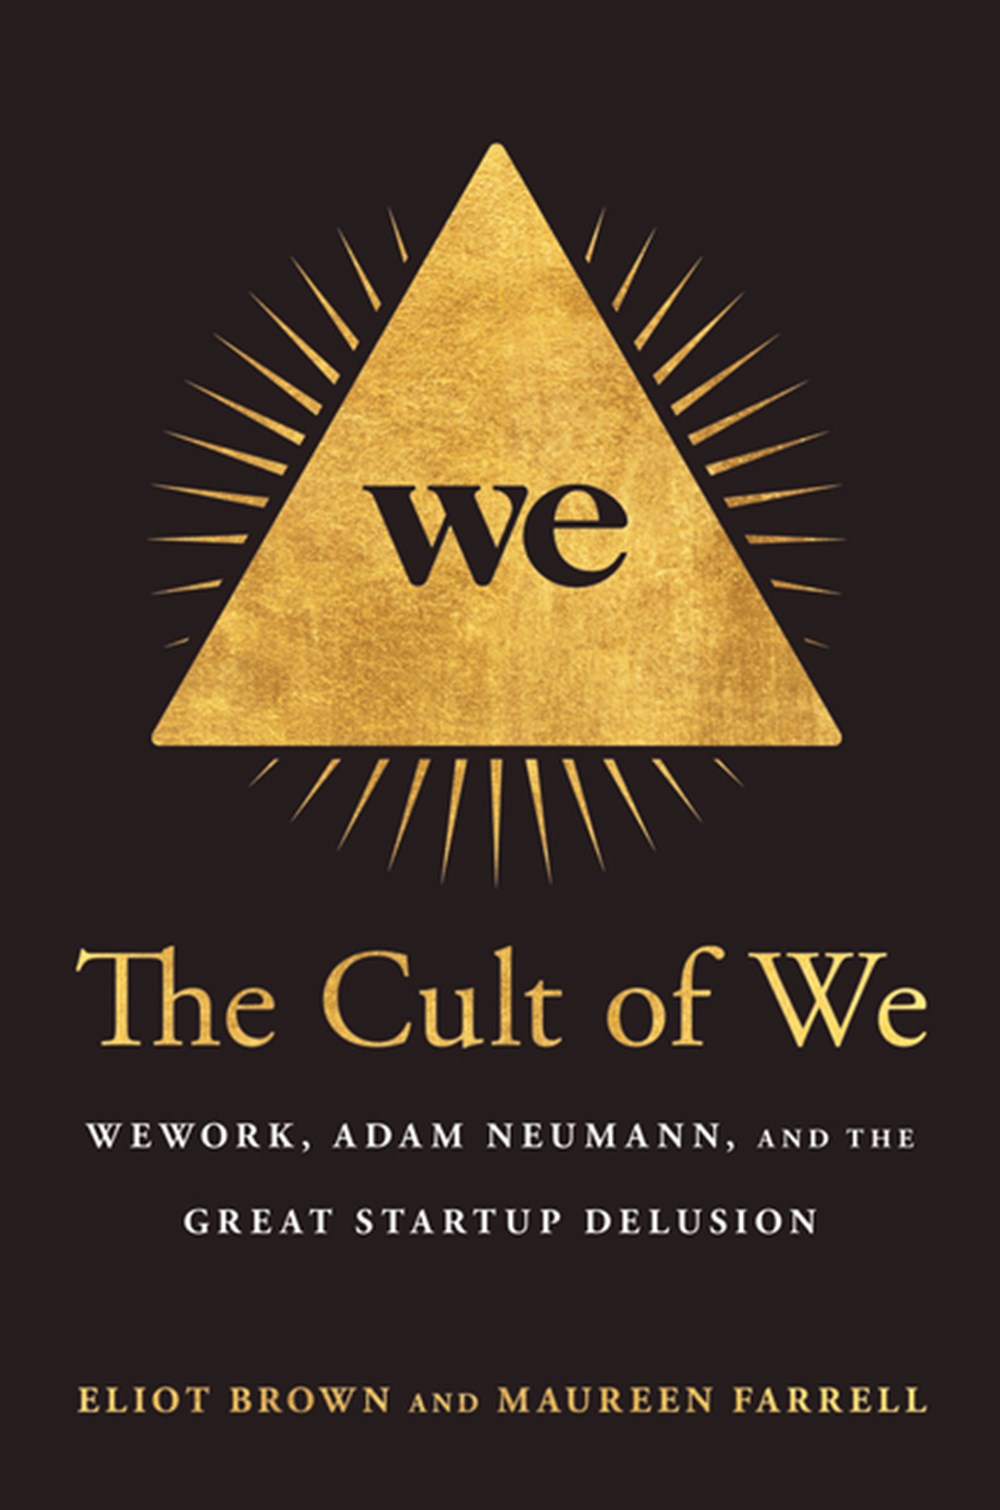 Cult of We: Wework, Adam Neumann, and the Great Startup Delusion